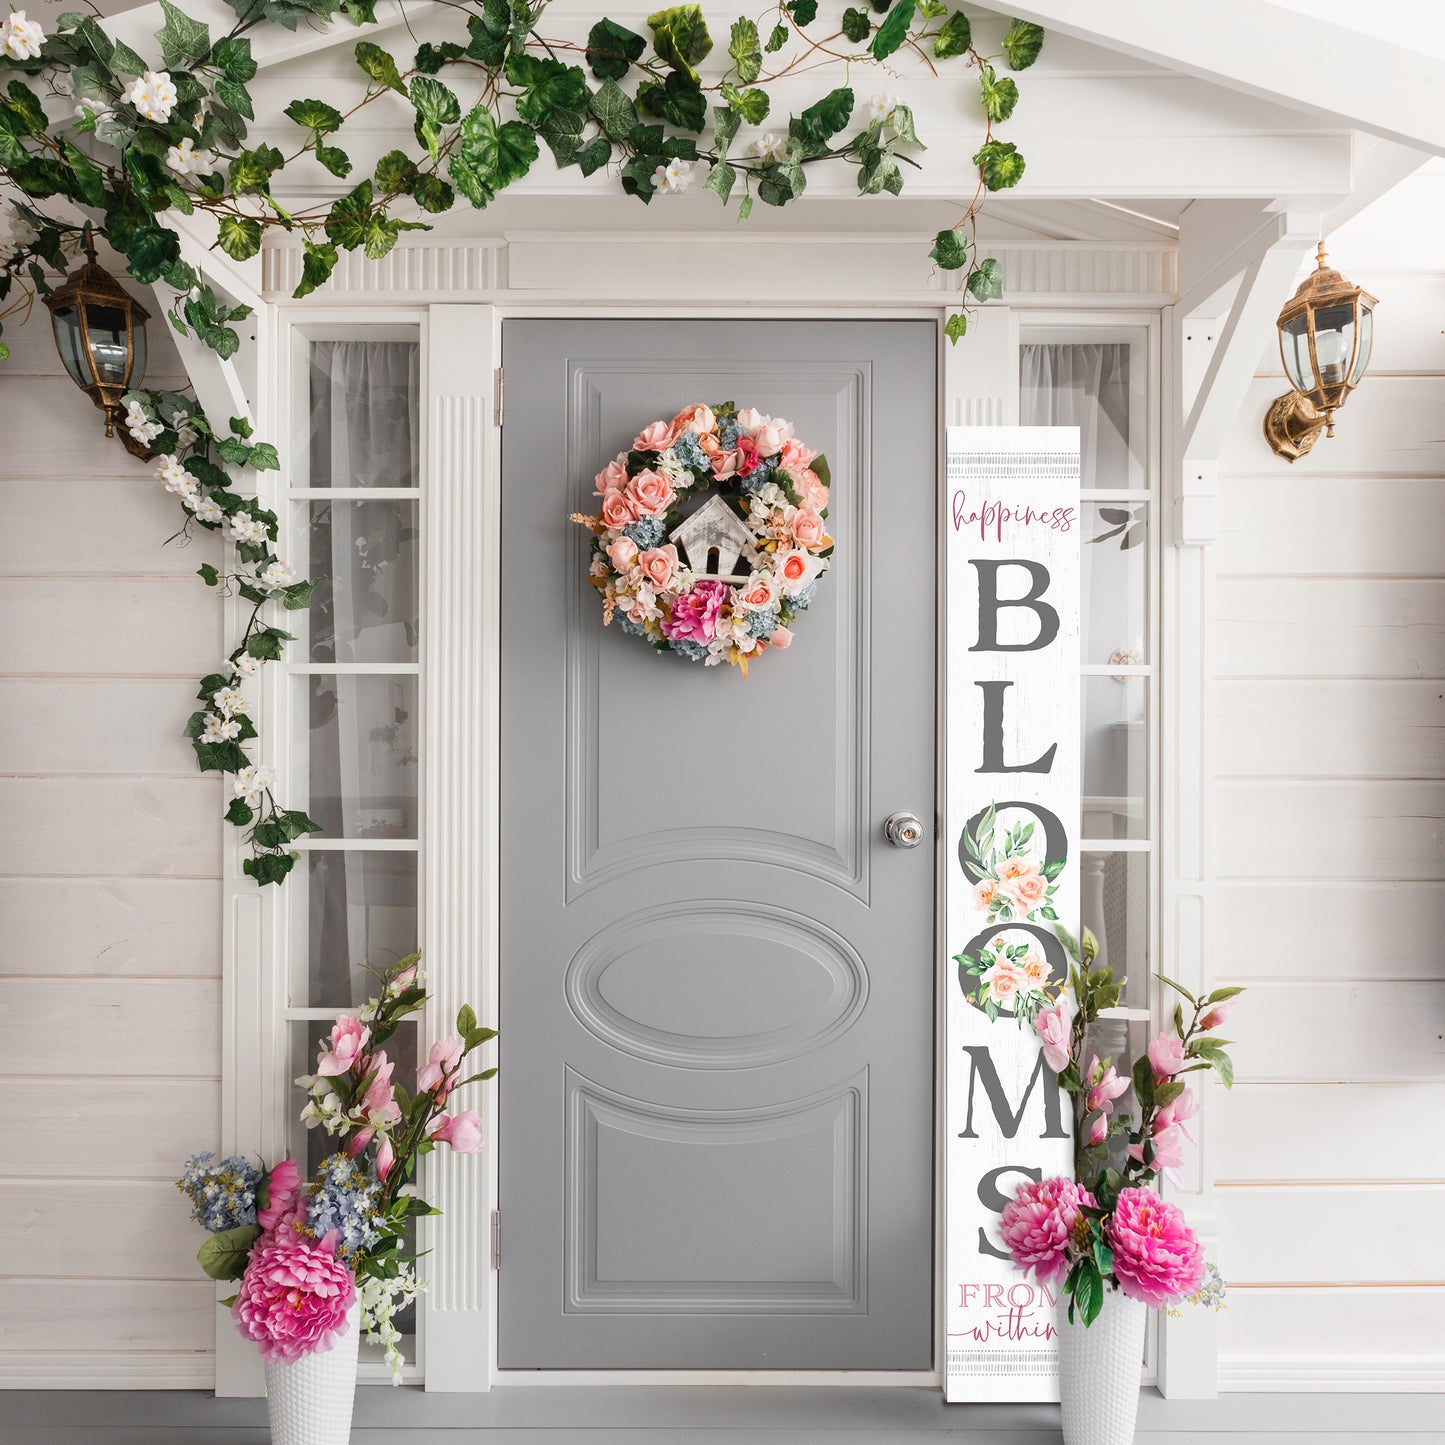 72in Spring Happiness Blooms From Within Outdoor Porch Sign - White, Front Porch Decor, Home Decor Indoor Outdoor Wood Sign